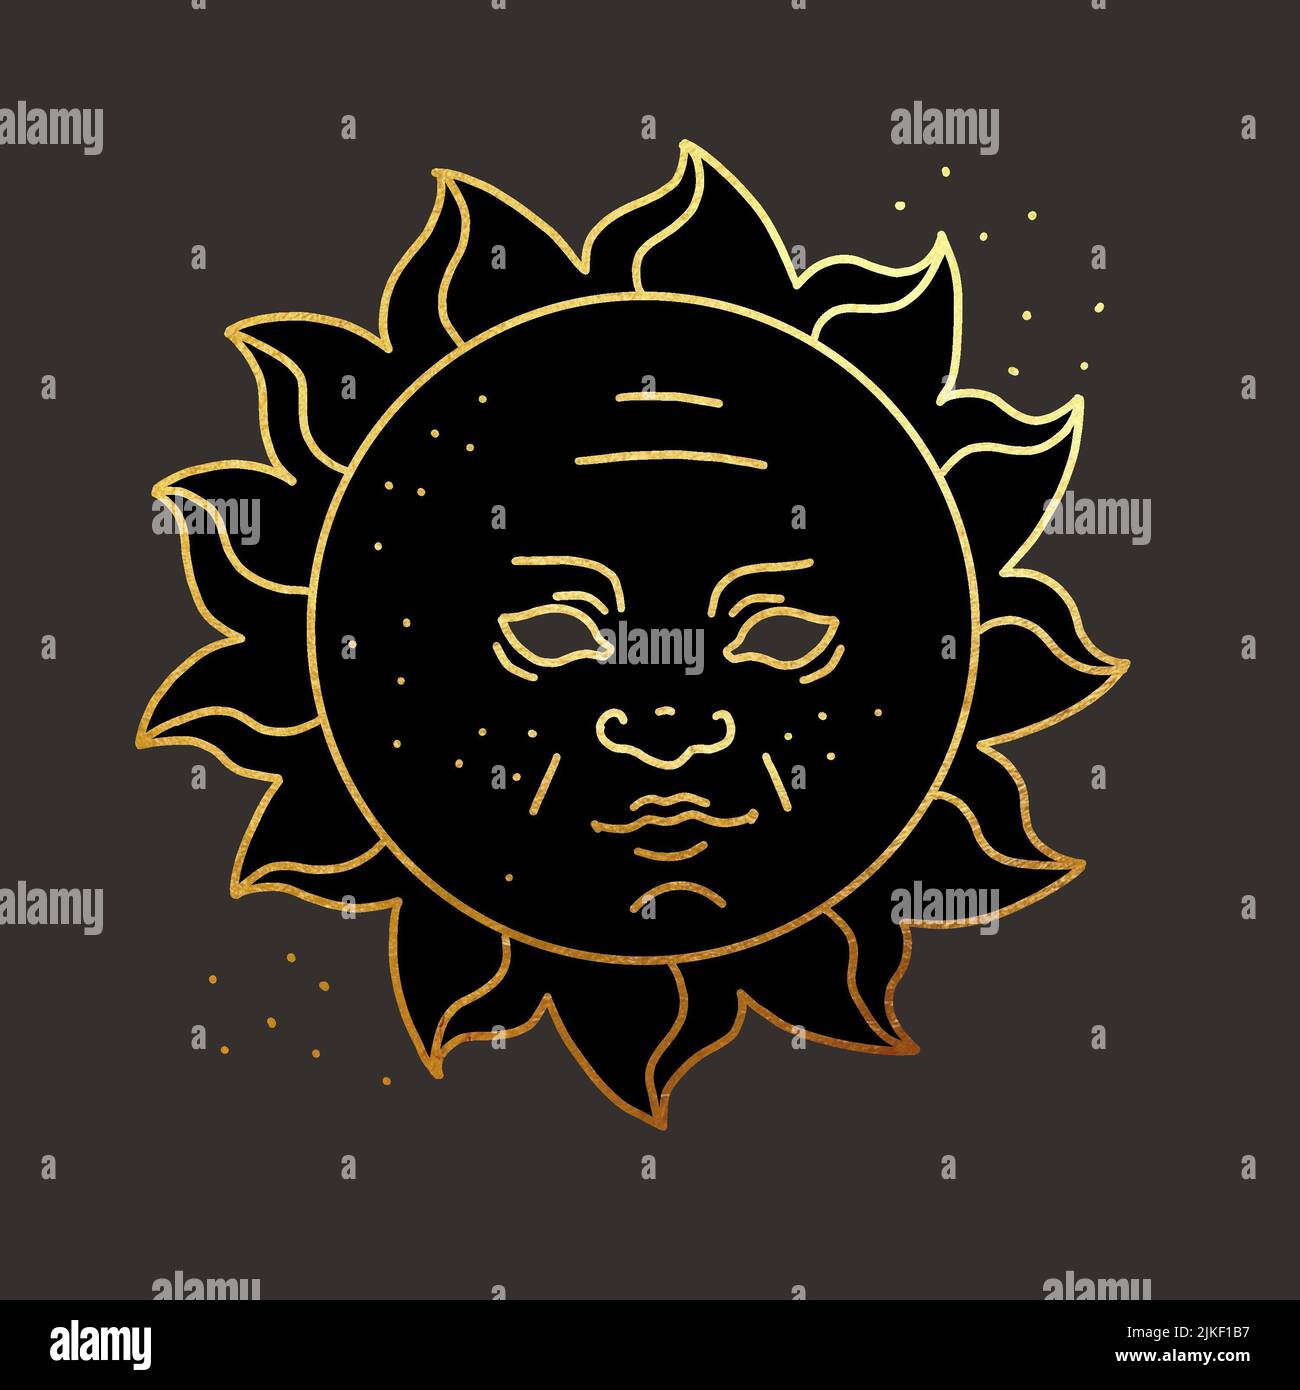 Sun tarot card with face. graphic illustration with golden lines on a dark background Stock Photo